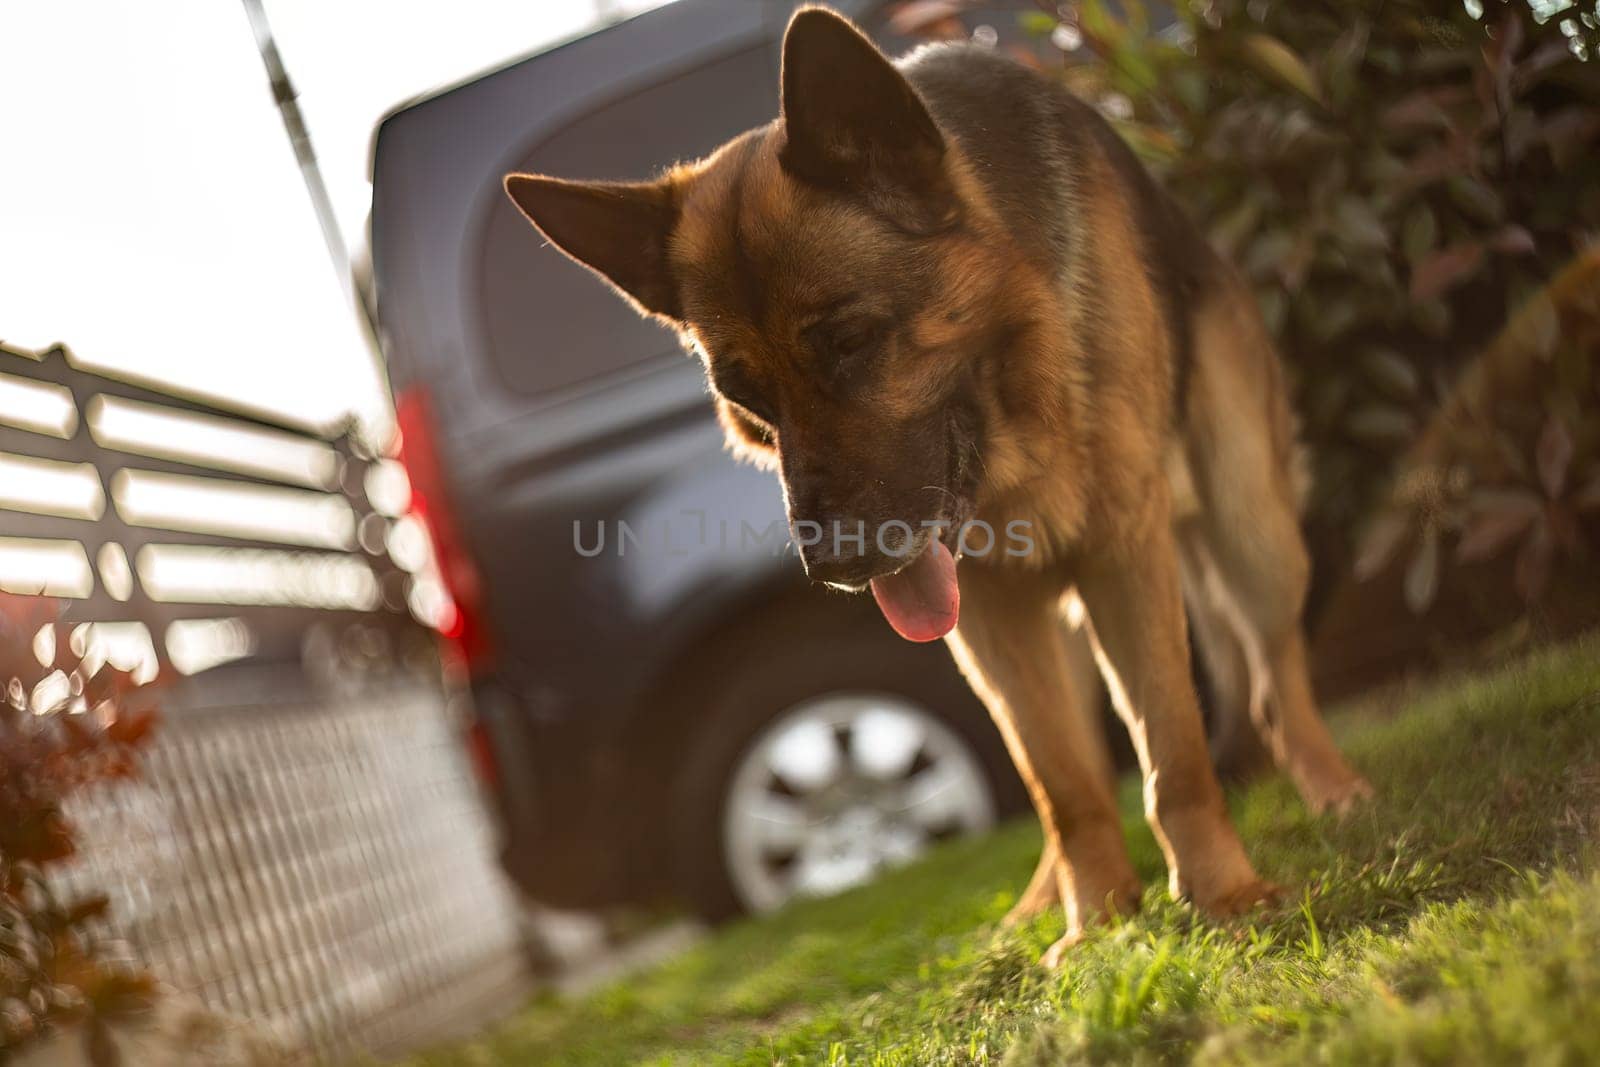 Adorable German Shepherd playing in the garden at sunset with golden sunlight bathing the scene.